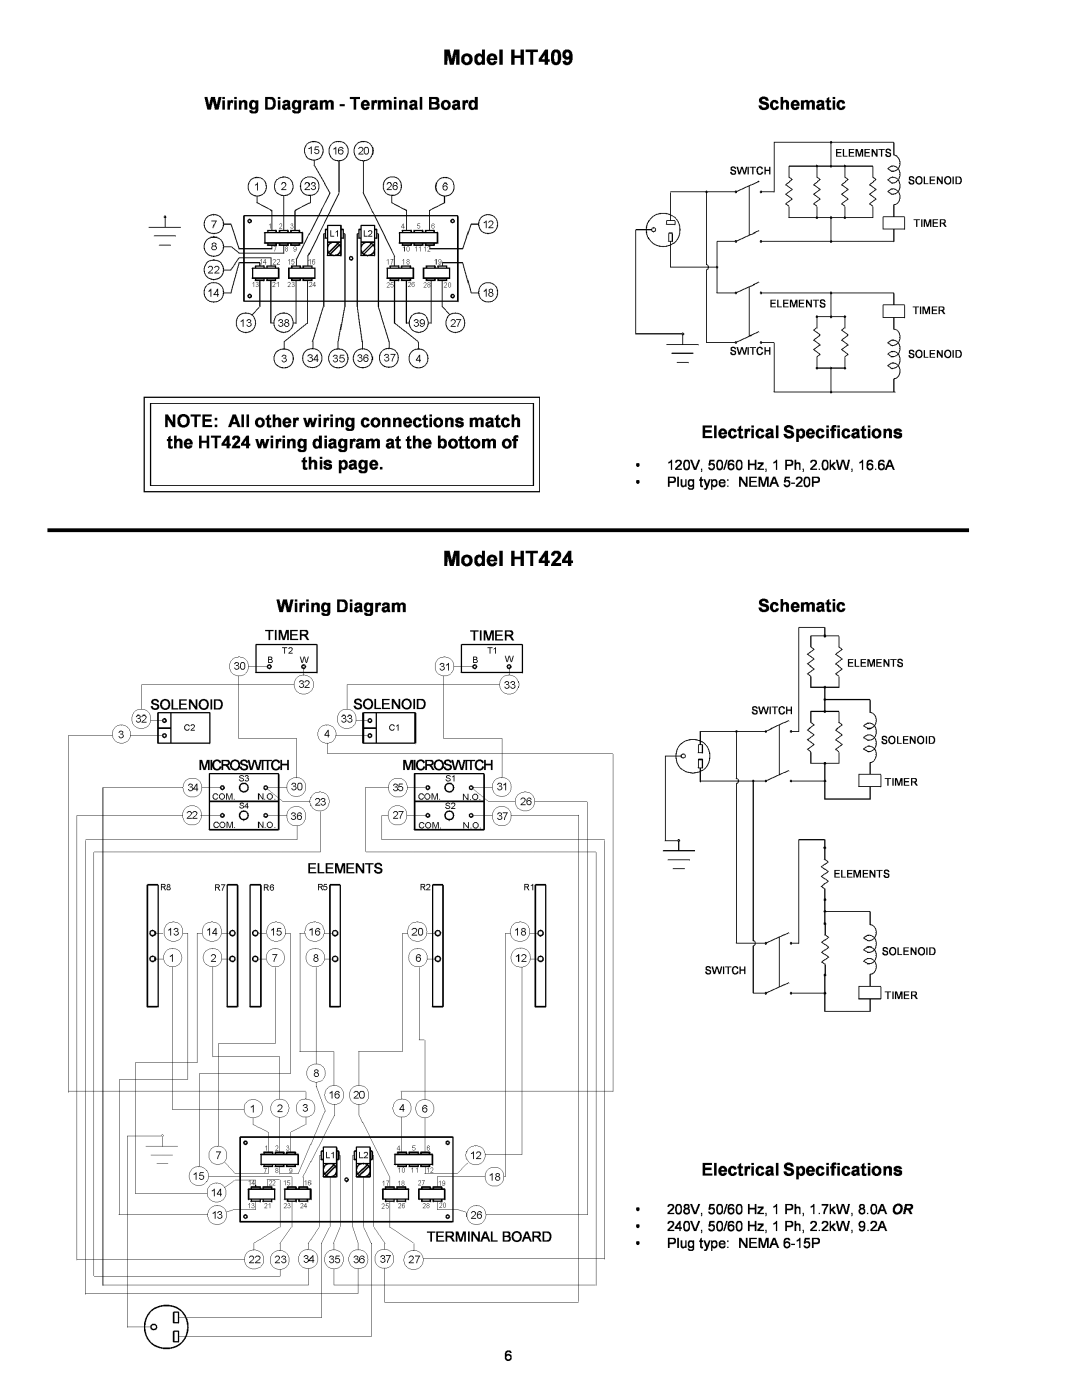 Toastmaster TP430 Model HT409, Model HT424, Wiring Diagram - Terminal Board, Schematic, Electrical Specifications 